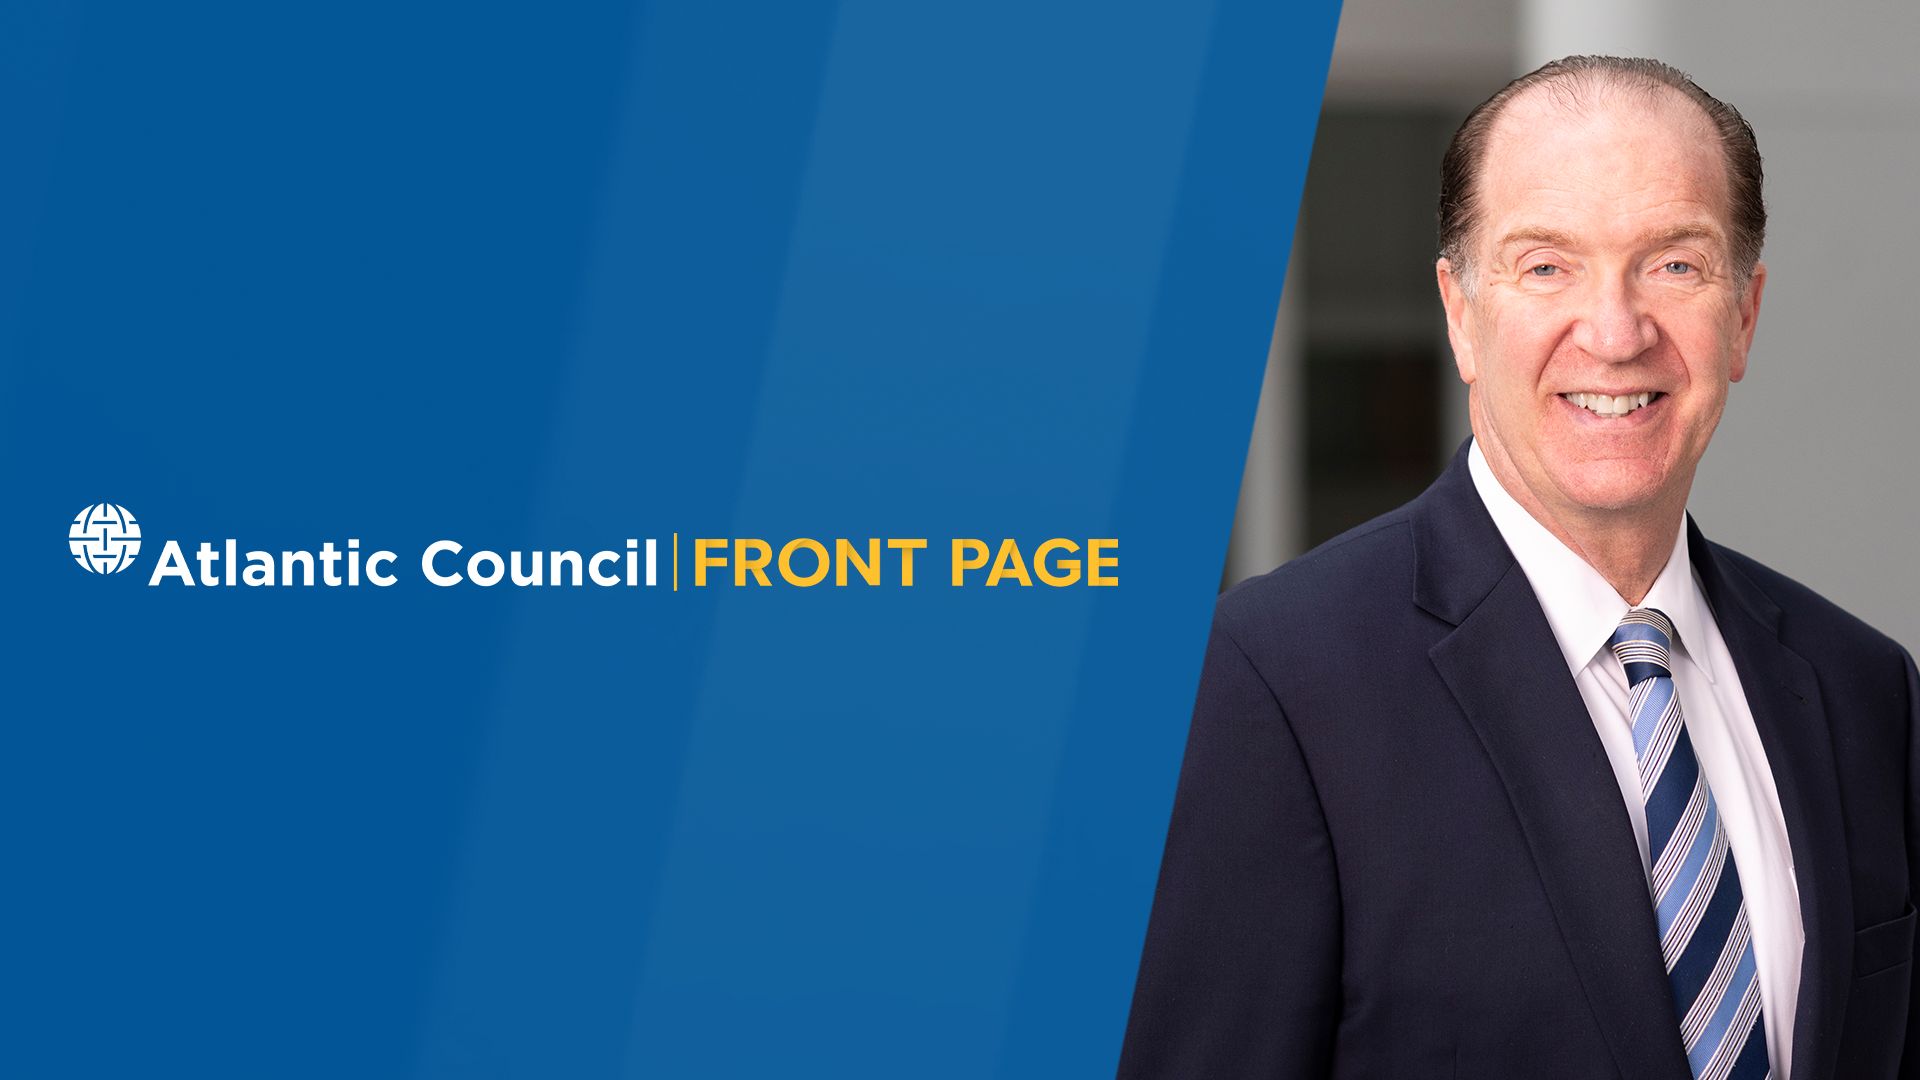 A Fireside Chat with President David Malpass at the Atlantic Council